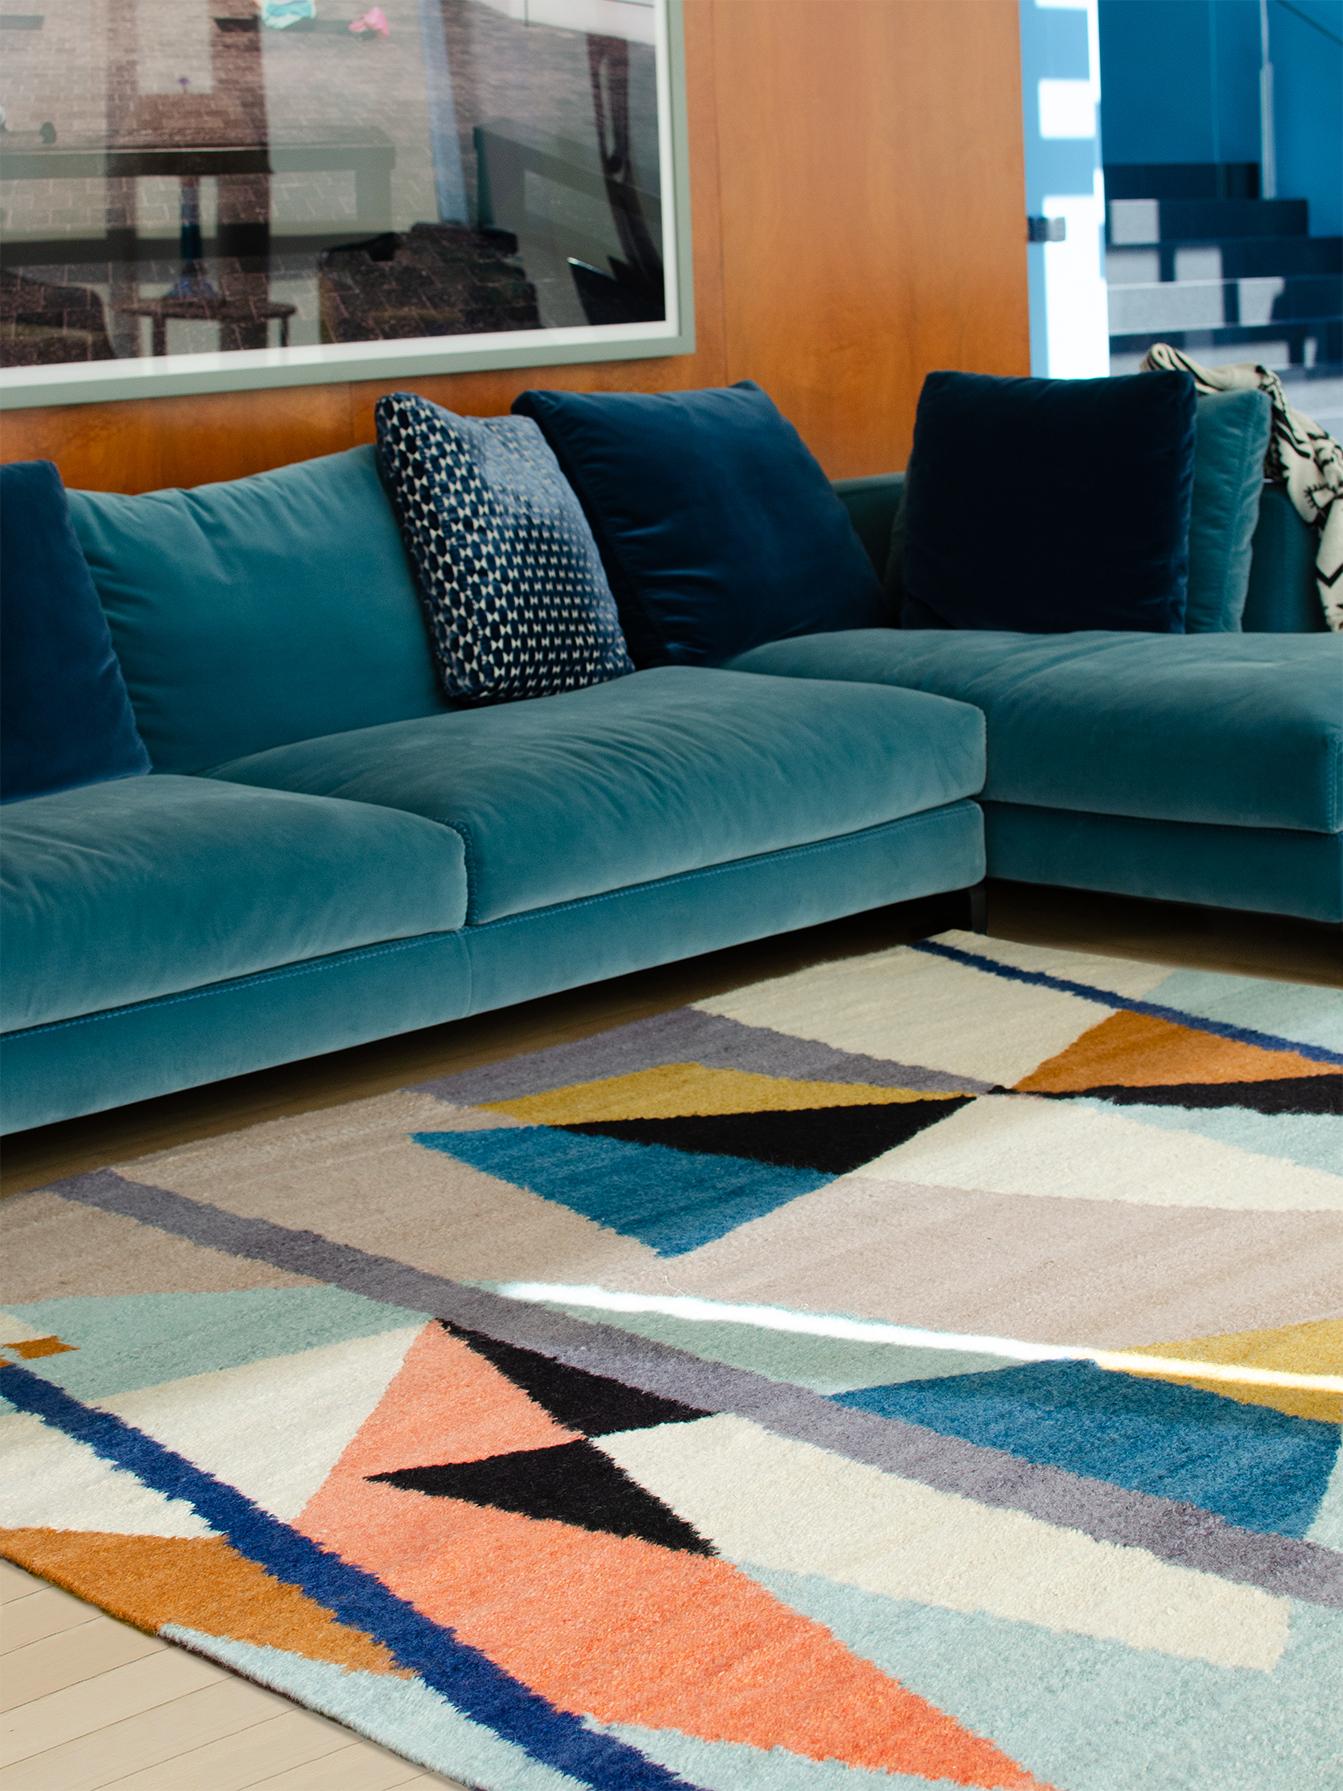 Adapted from the original artwork by Juan Del Prete, Composición con elementos geometricos triangulares, 1946.

LALANA RUGS is an applied arts initiative born from the desire to combine proposals by contemporary artists with traditional local